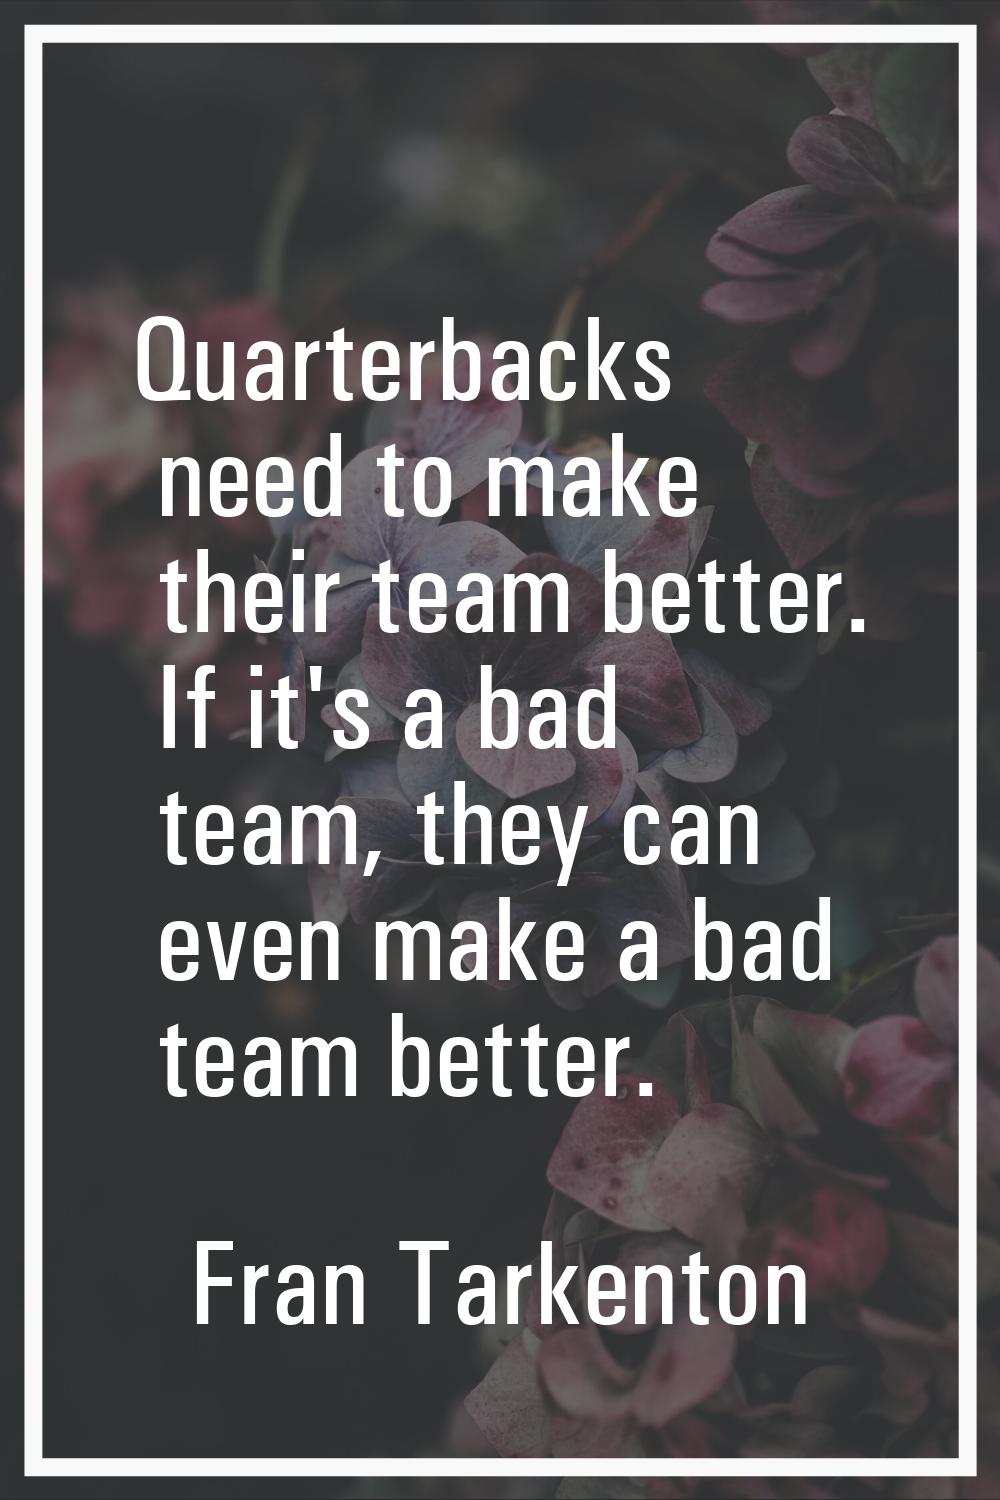 Quarterbacks need to make their team better. If it's a bad team, they can even make a bad team bett